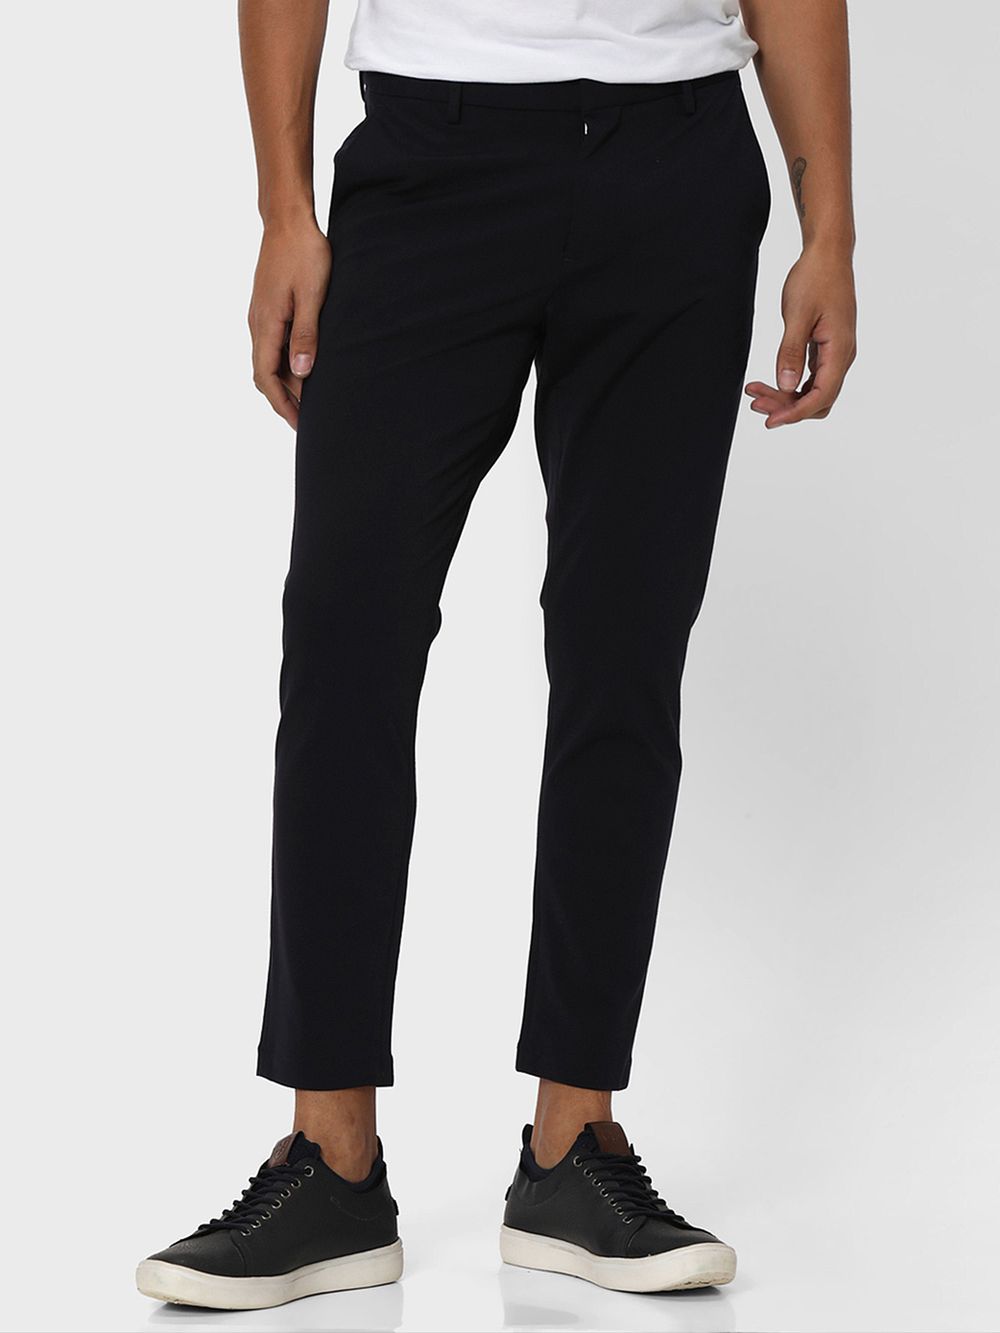 Navy Ankle Length Stretch Chinos Trouser